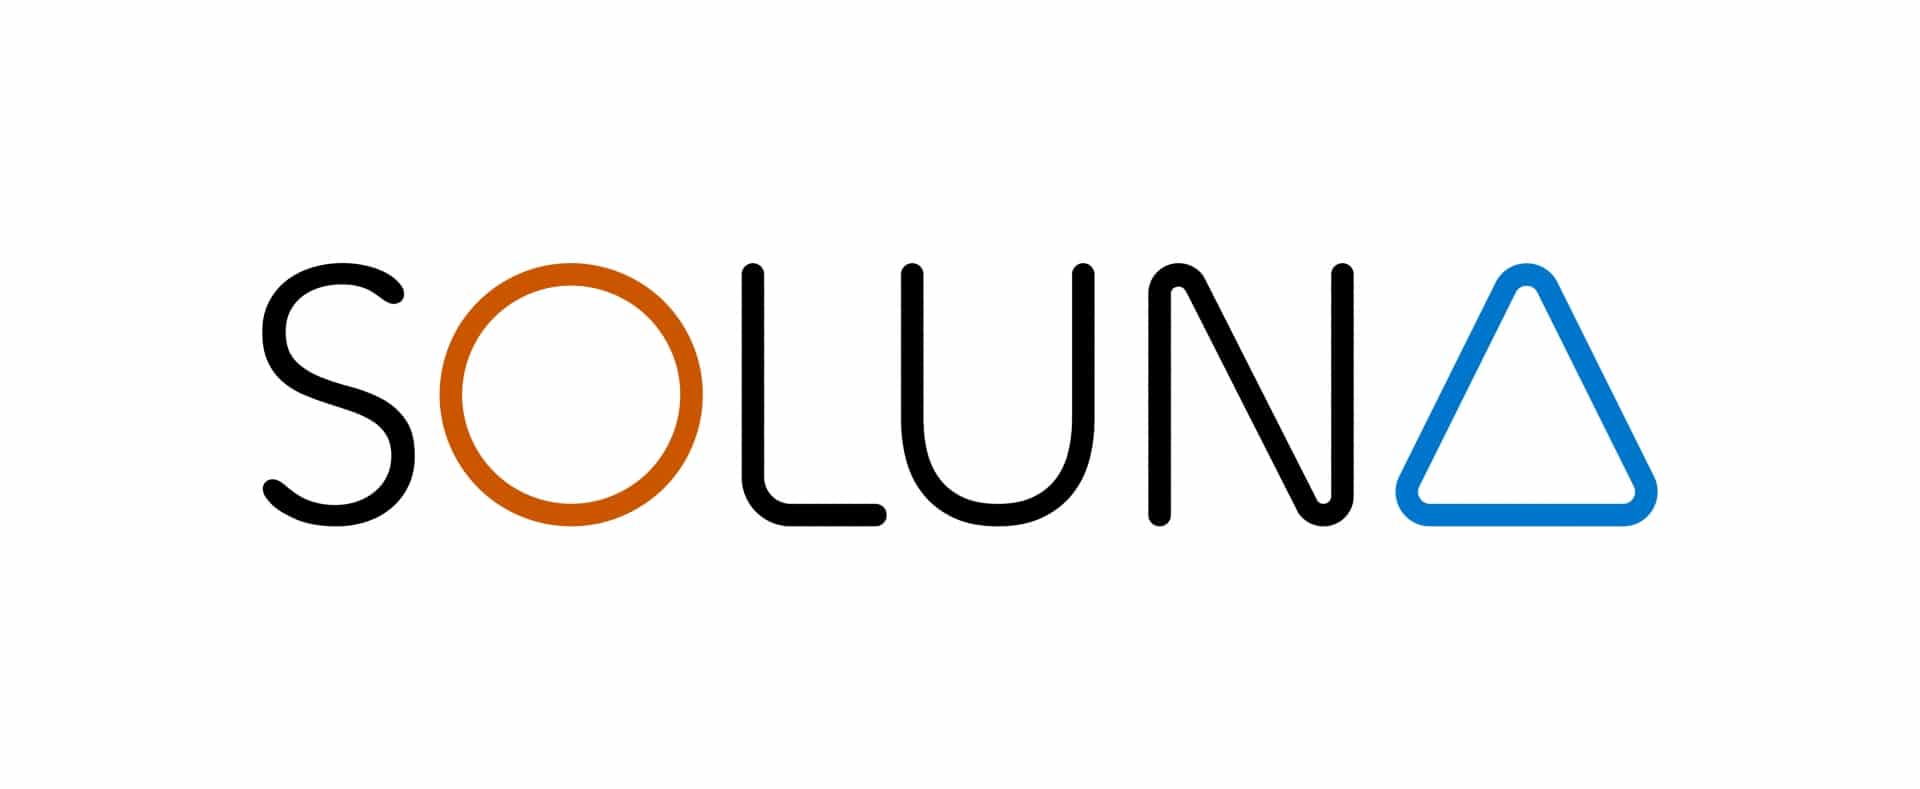 Catchword-named Soluna launches blockchain infrastructure project